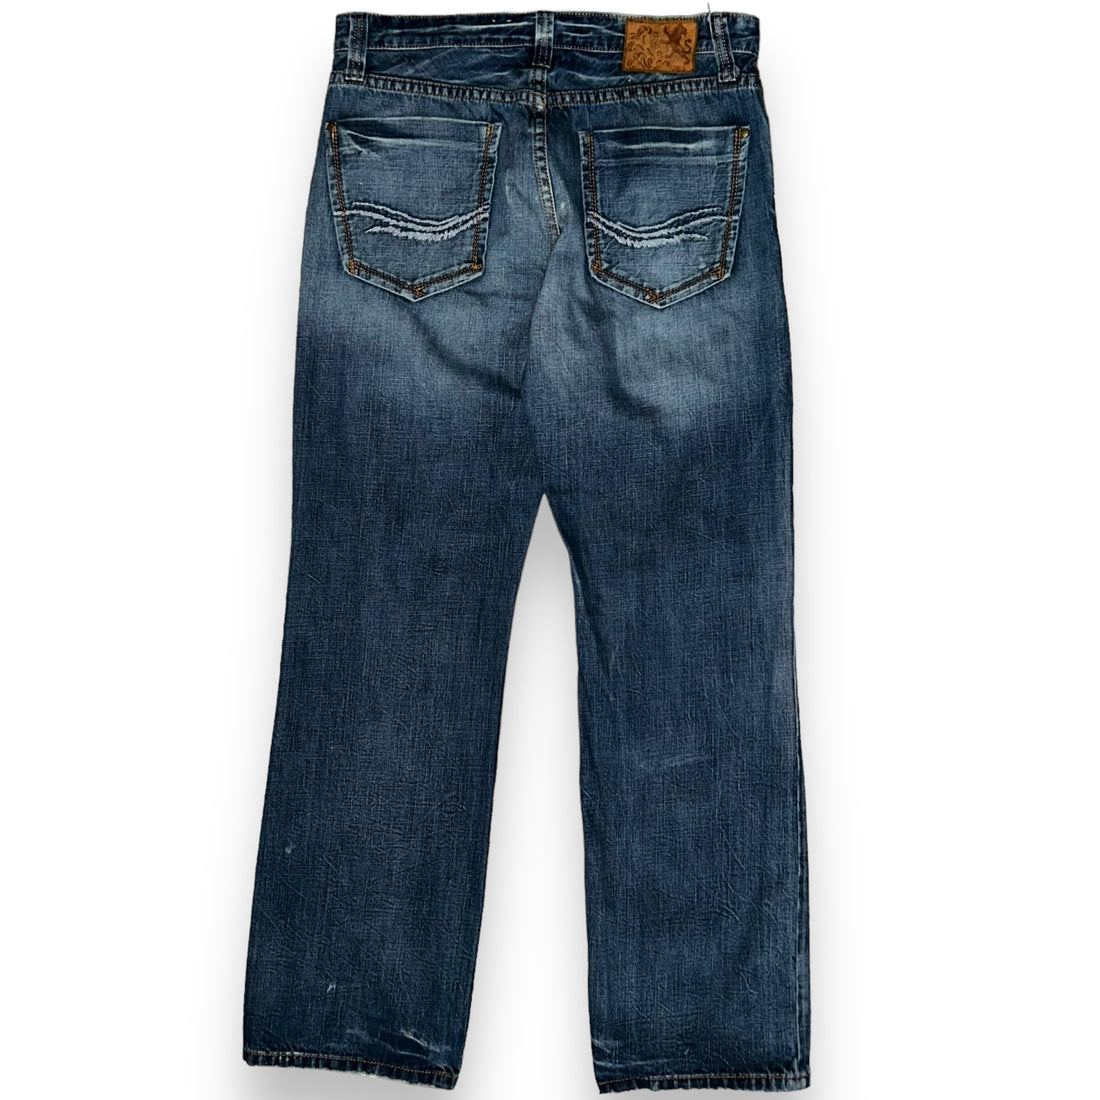 Baggy Jeans King Of Prides  (34 USA  L)